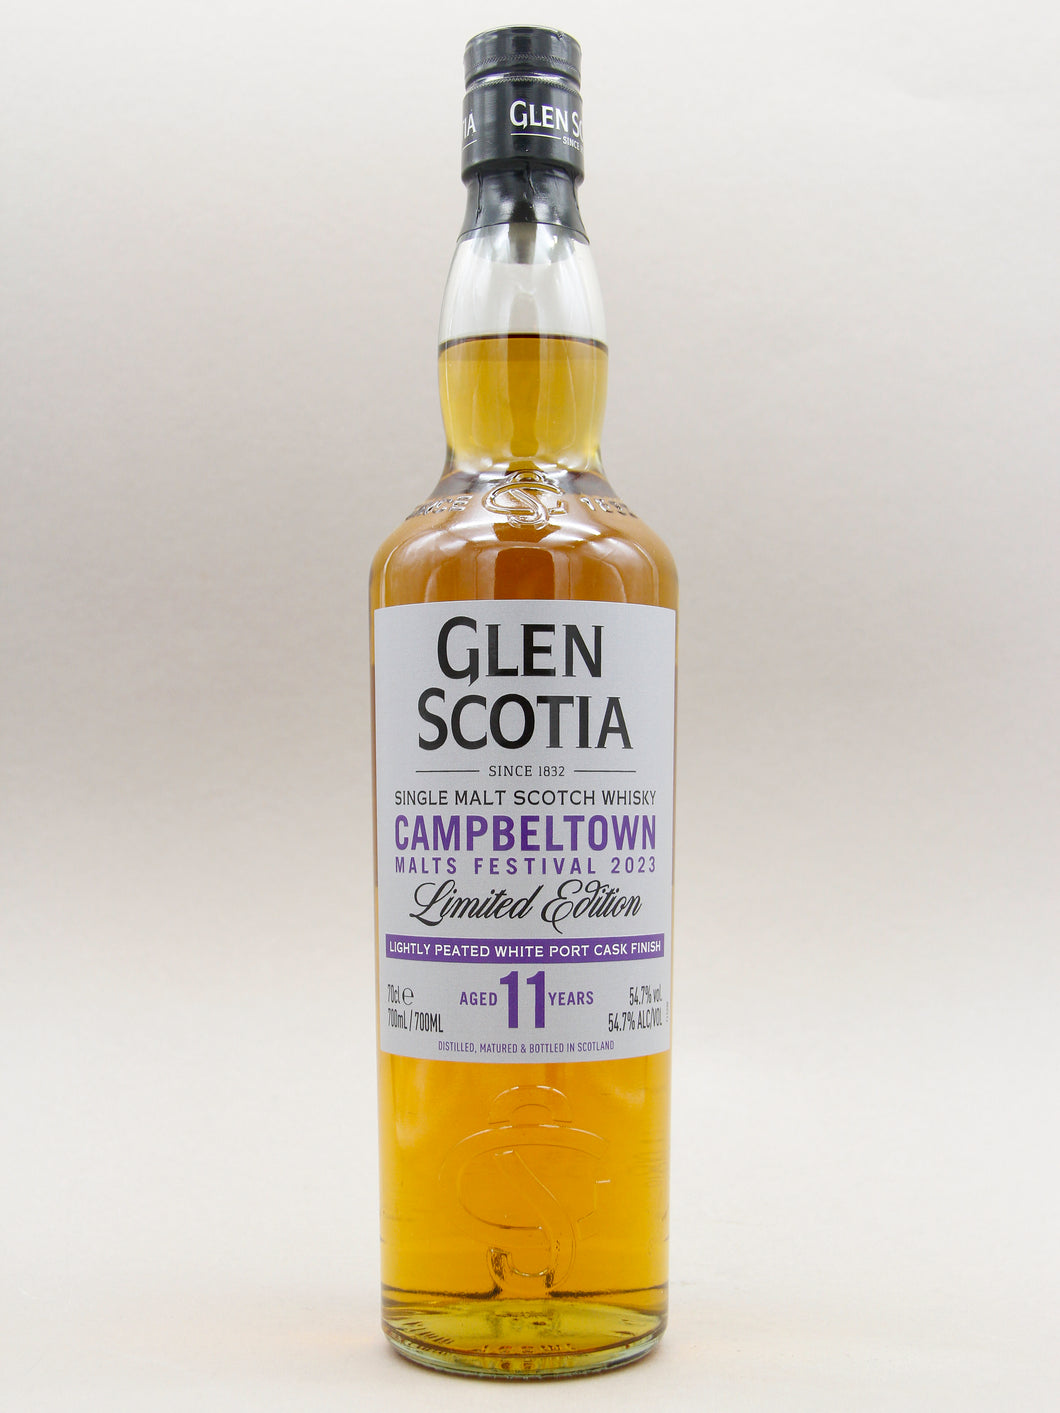 Glen Scotia 11 Years Old, Campbeltown Malts Festival 2023, Limited Edition, Single Malt Scotch Whisky, Lightly Peated White Port Cask Finish, Campbeltown, Scotland (54.7%, 70cl)